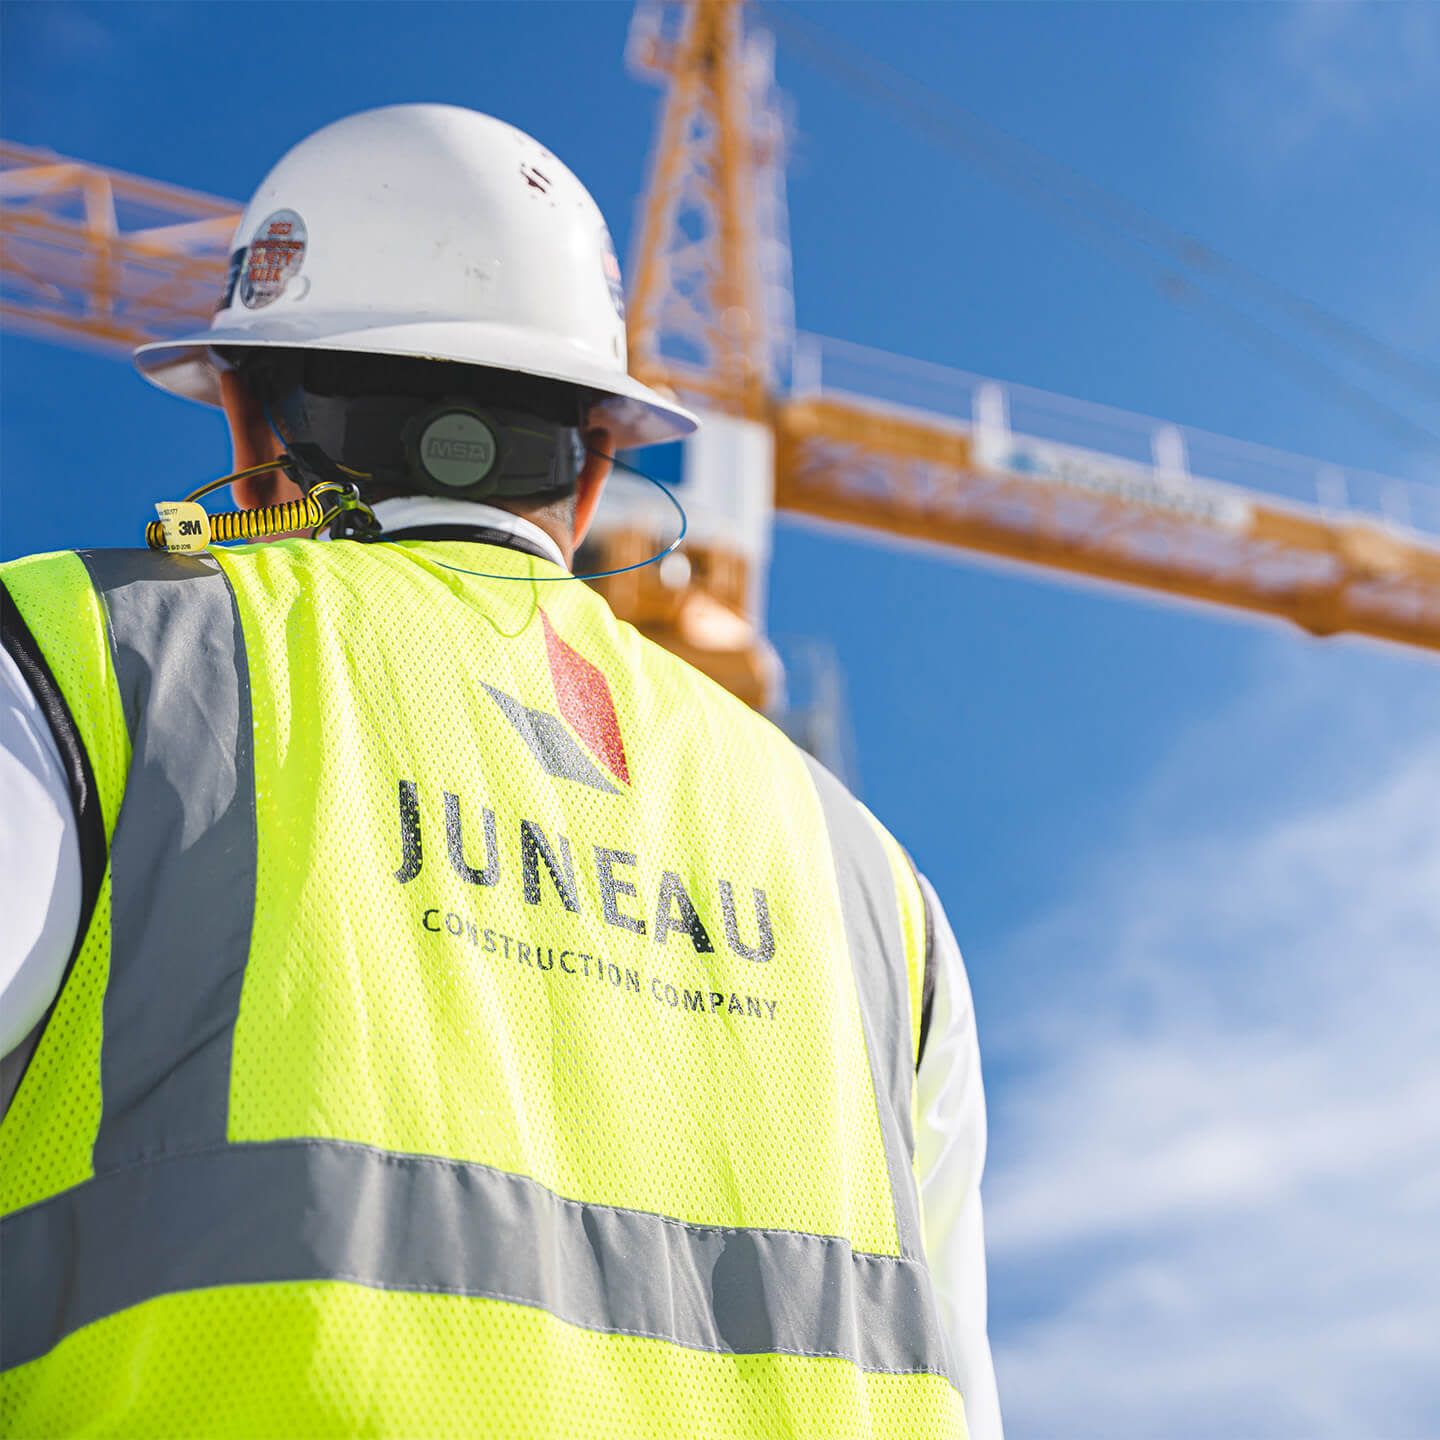 A Juneau contractor wearing a safety vest and a hard hat looking at a crane